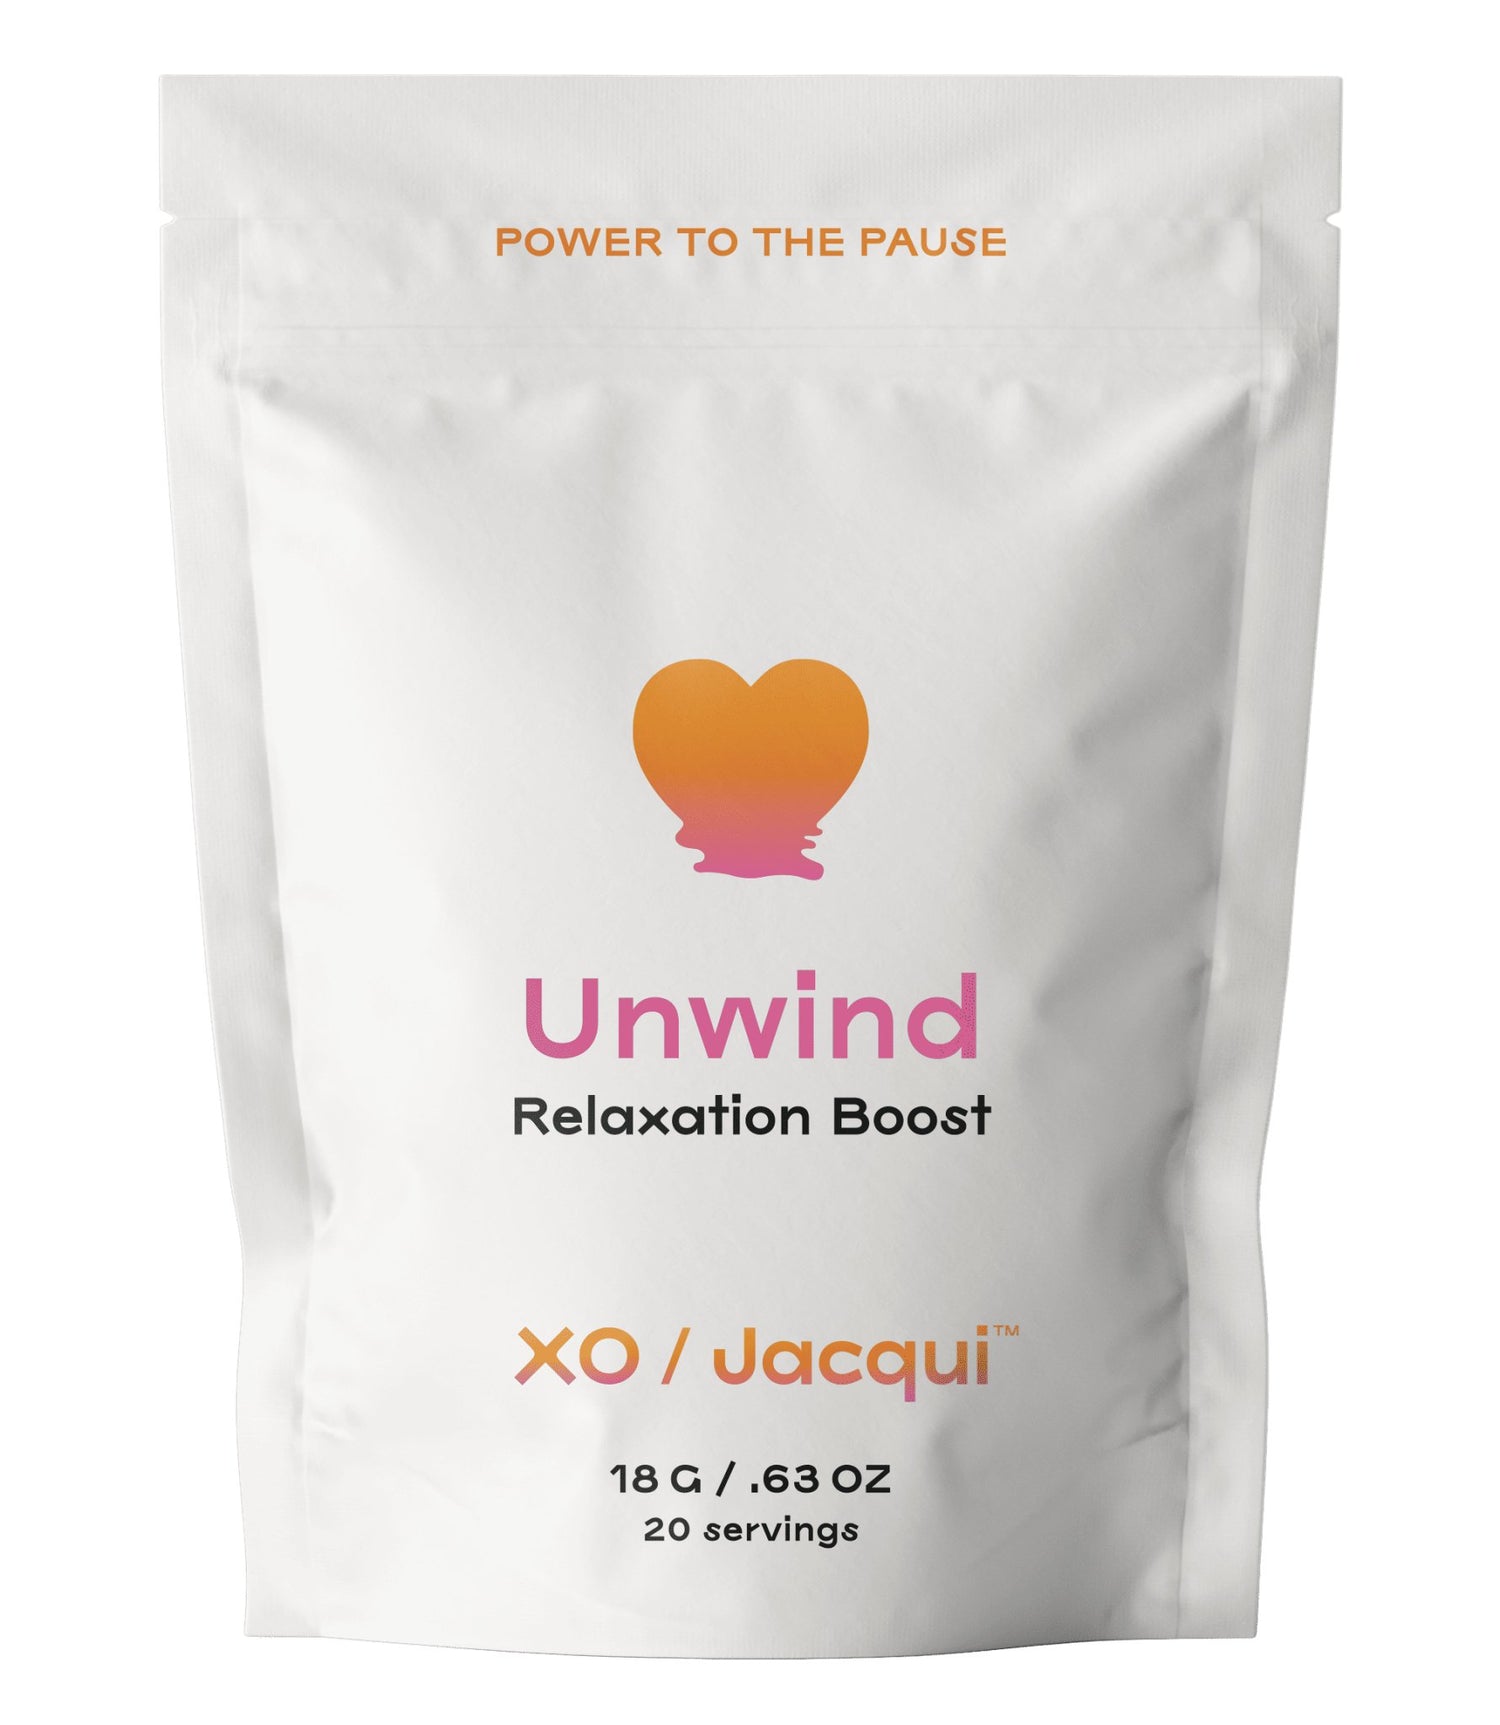 Power to the Pause | Unwind Relaxation Boost | Unwind Boost - XO Jacqui